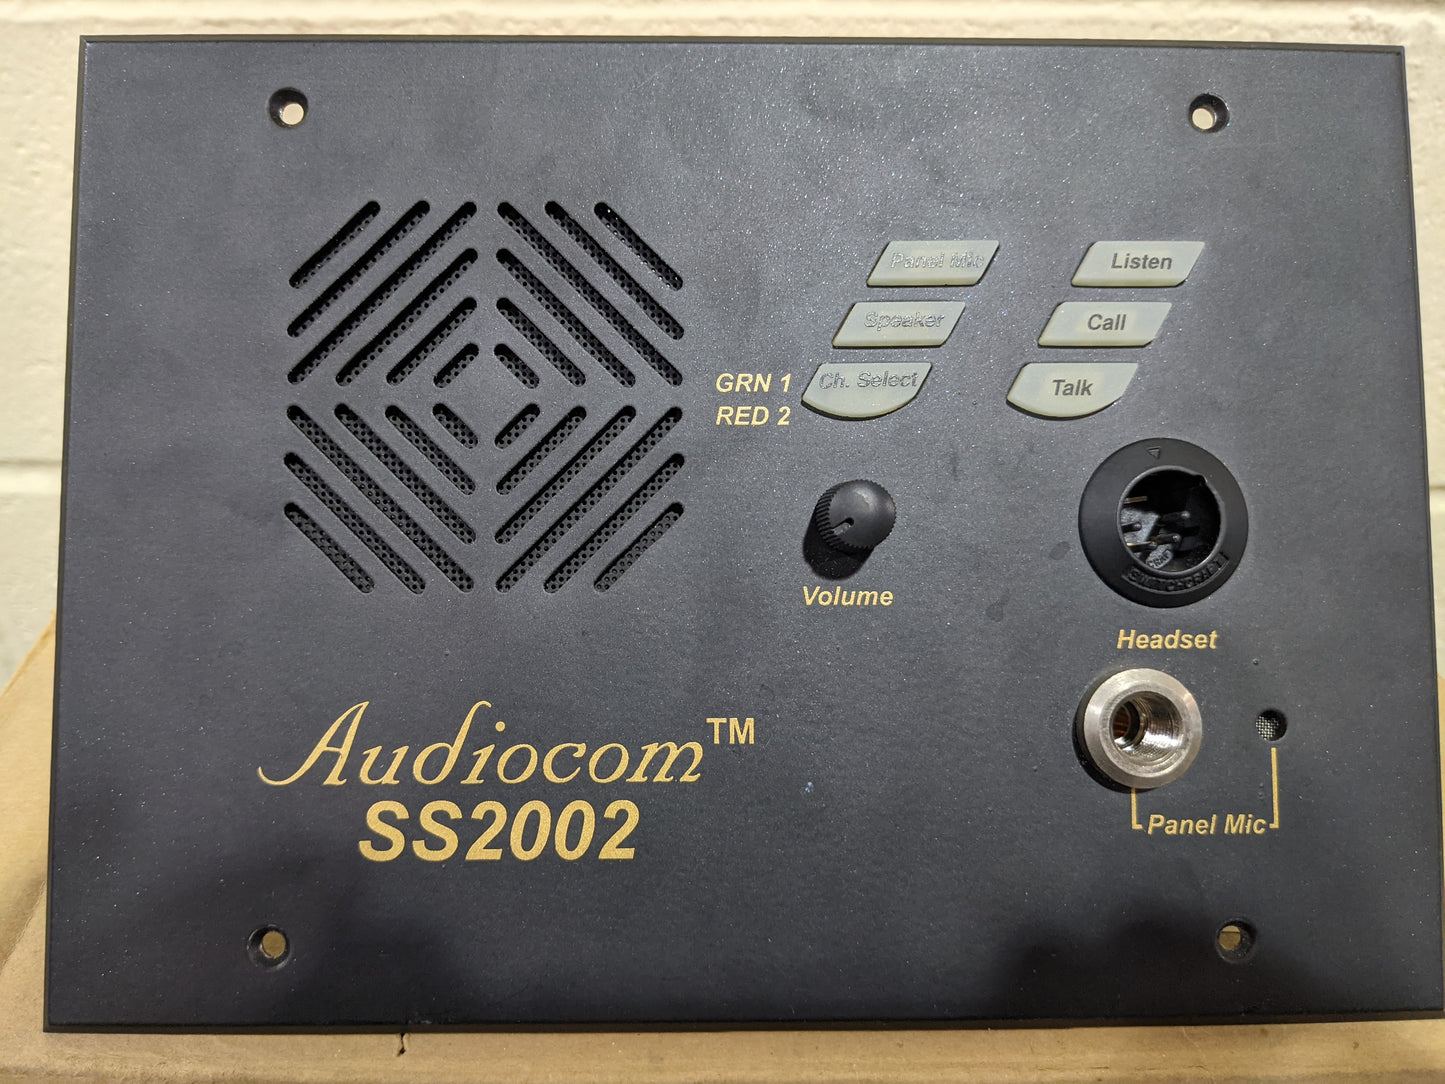 New TELEX SS-2002 Dual Channel Speaker Station for Sale. We Sell Professional Audio Equipment. Audio Systems, Amplifiers, Consoles, Mixers, Electronics, Entertainment, Sound, Live.